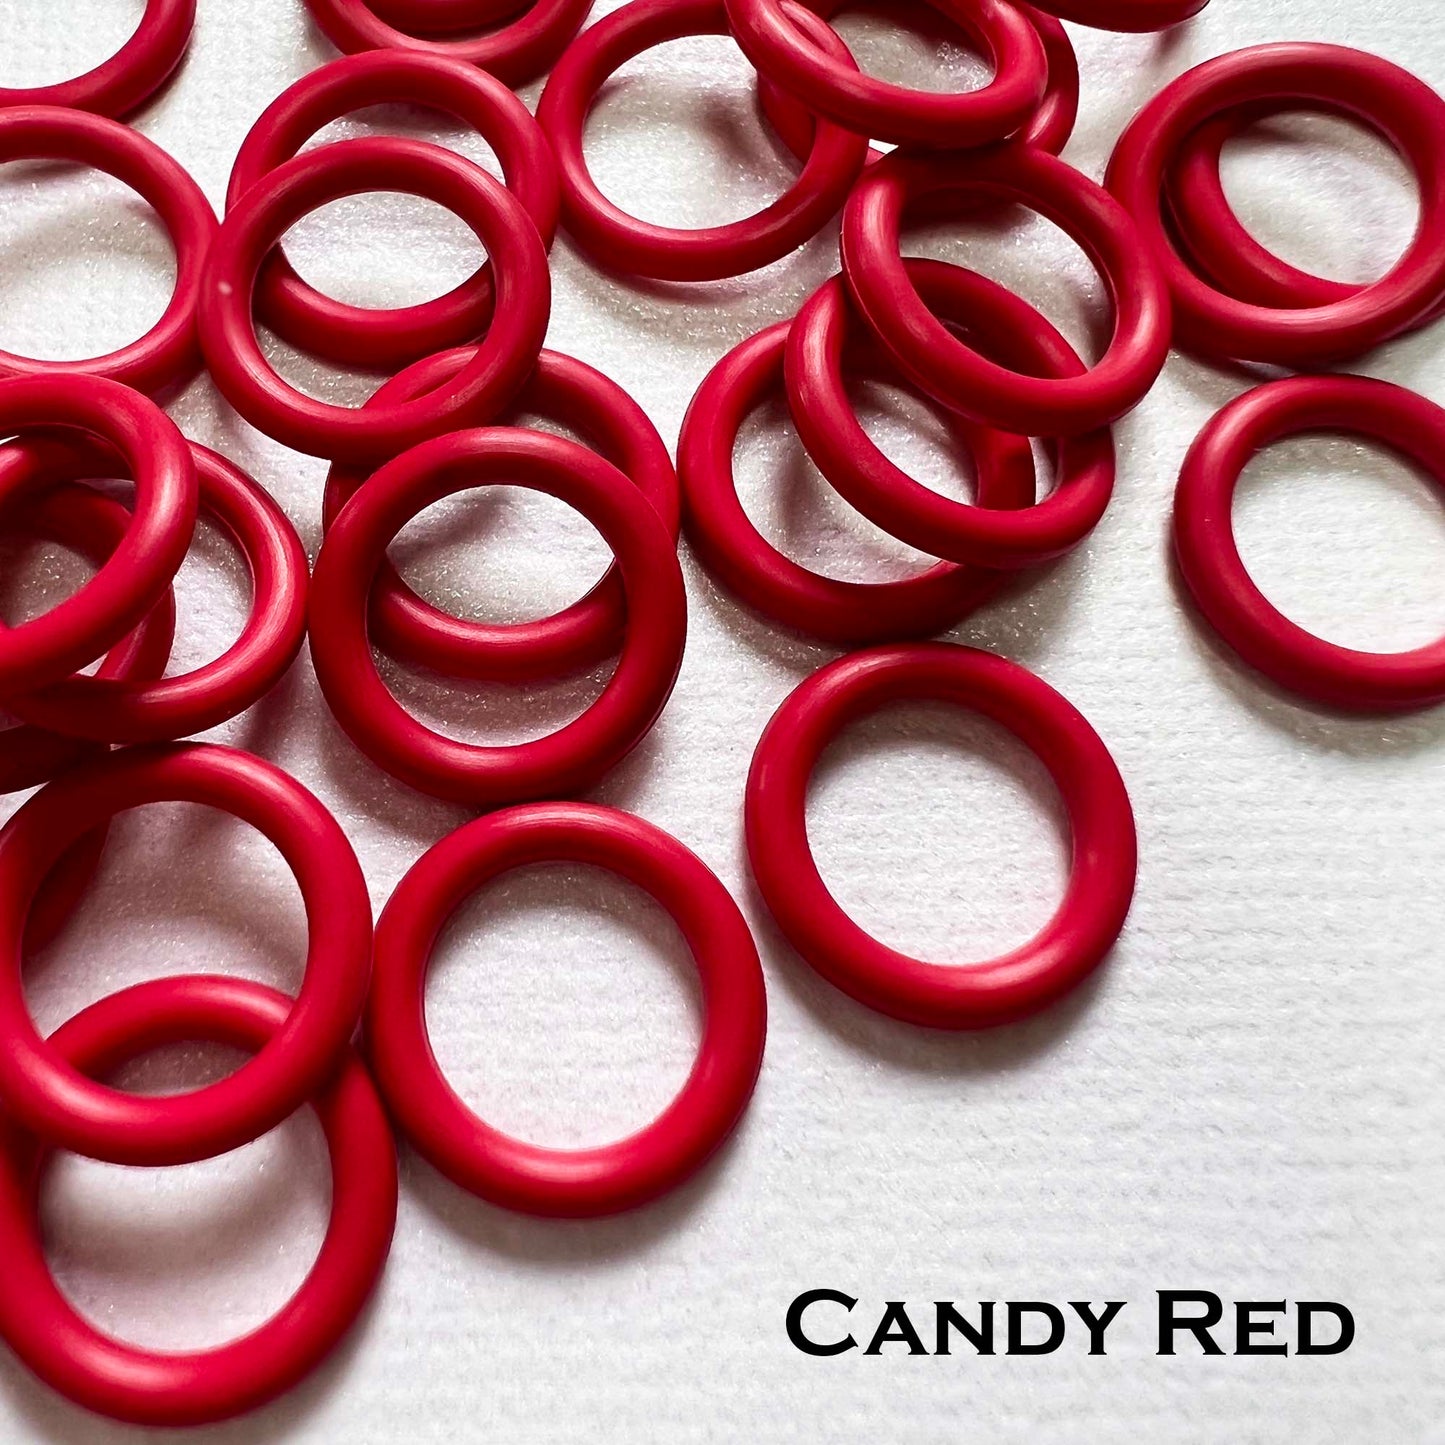 12mm Rubber O-Rings (ID: 8.5mm) - choose color & quantity